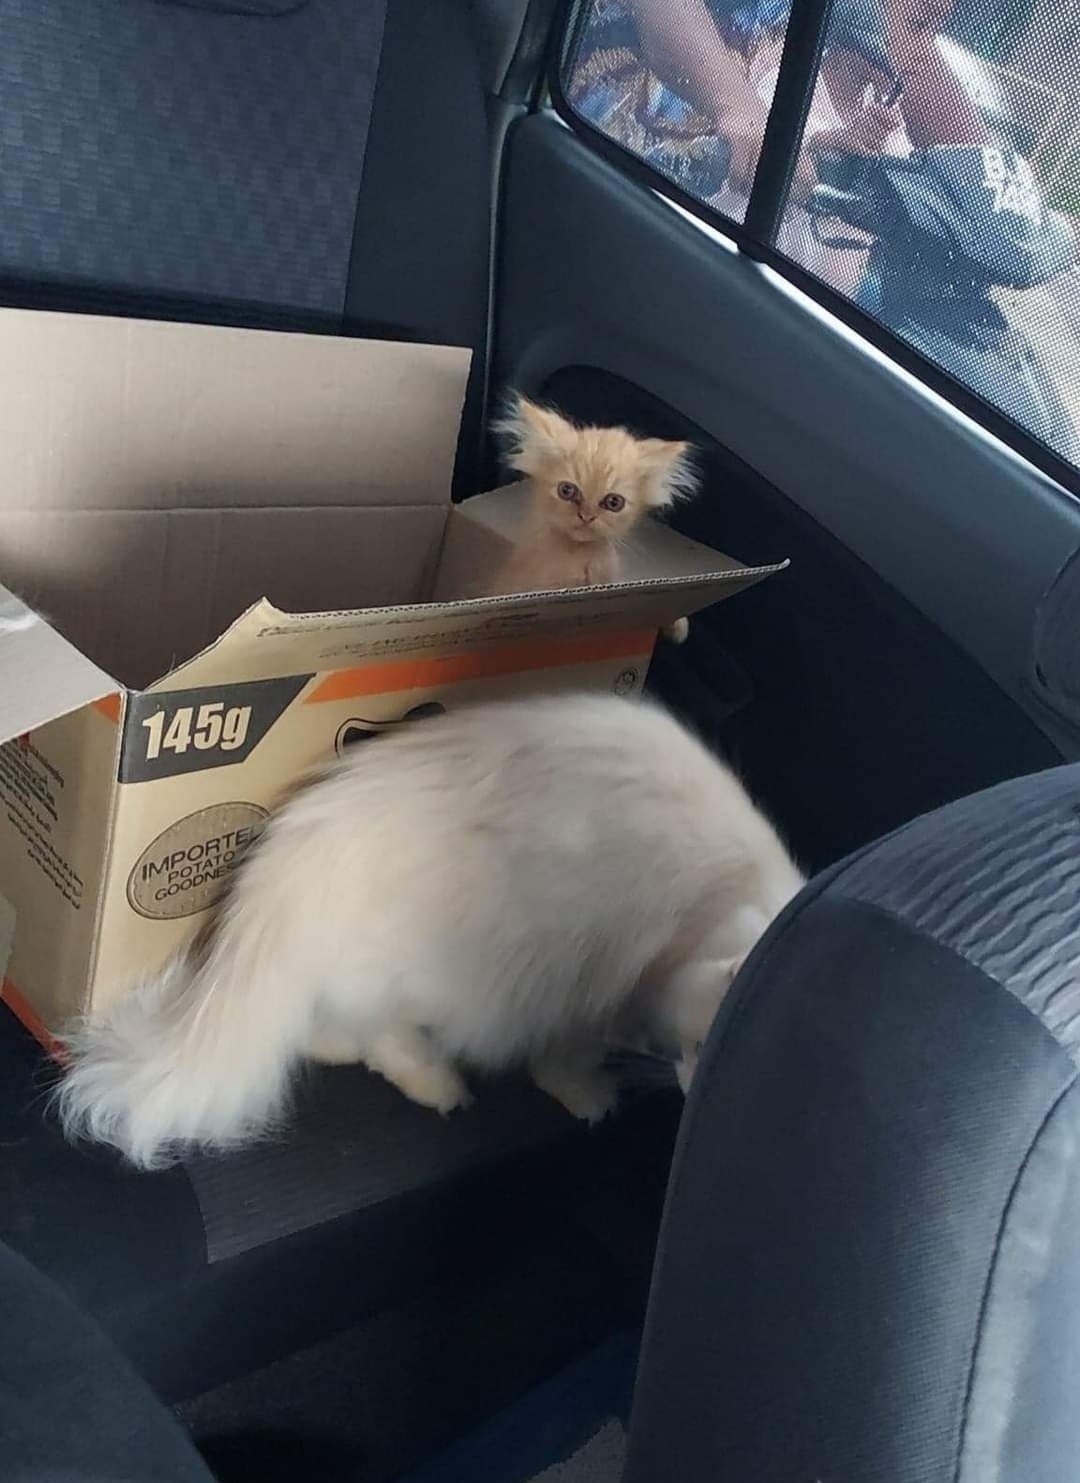 kitten with hair sticking up poking head out of box in car. the cat is quite small and, with their disheveled hair, they look silly.